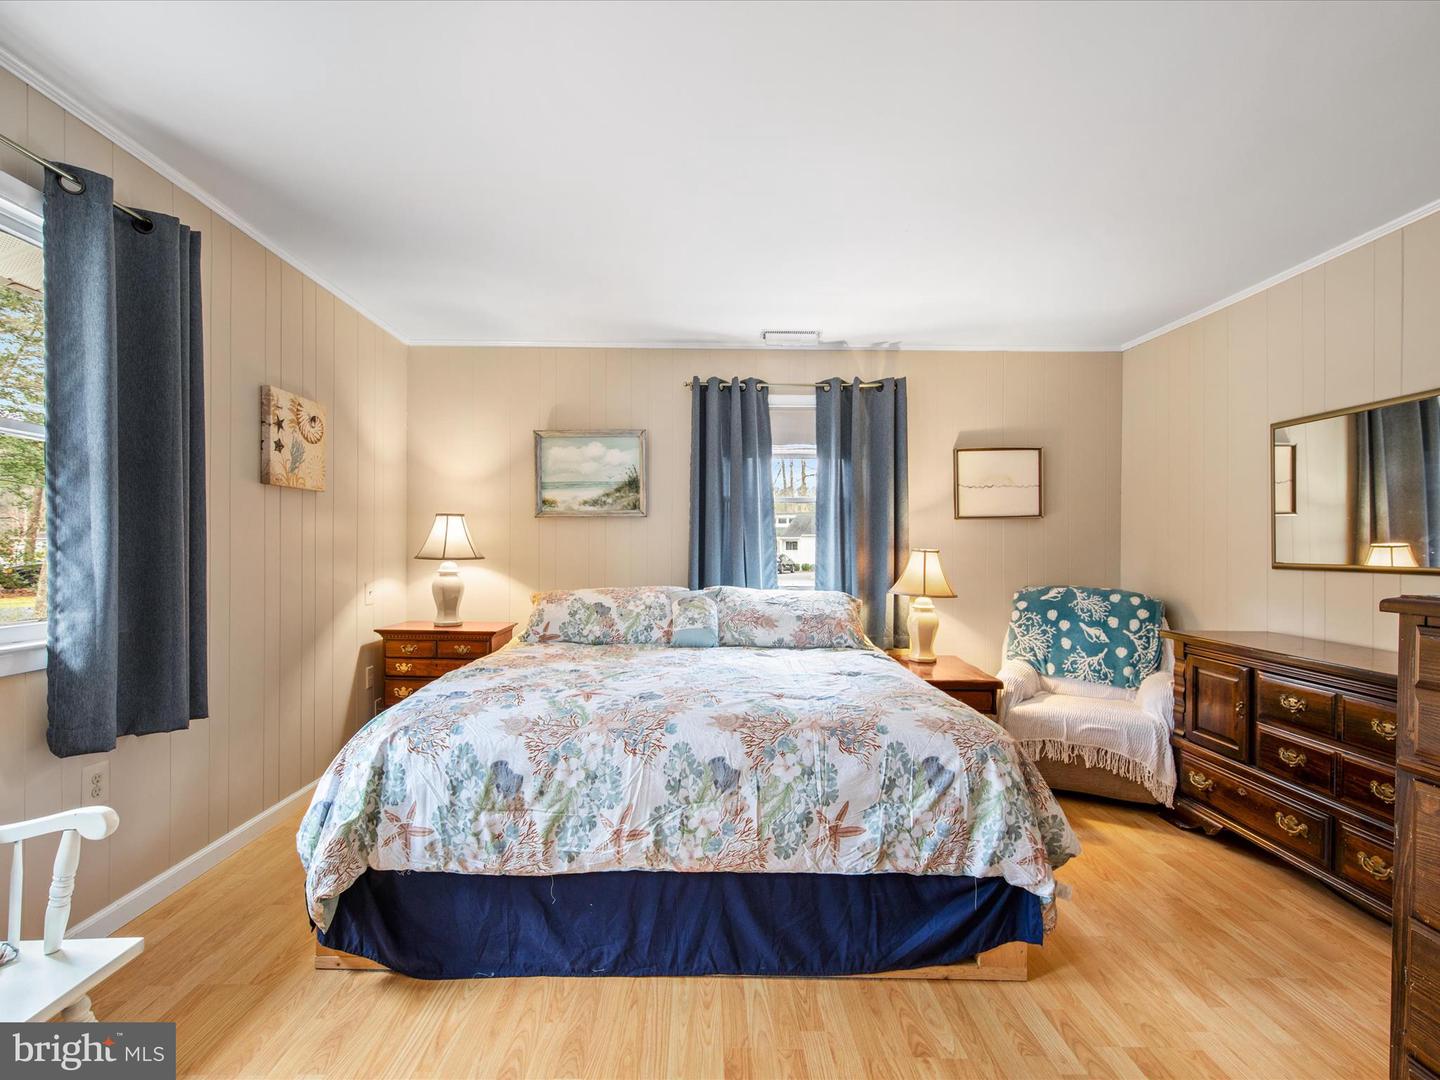 MDWO2019272-802894944956-2024-03-01-08-17-38 20 Southwind Ct | Berlin, MD Real Estate For Sale | MLS# Mdwo2019272  - 1st Choice Properties